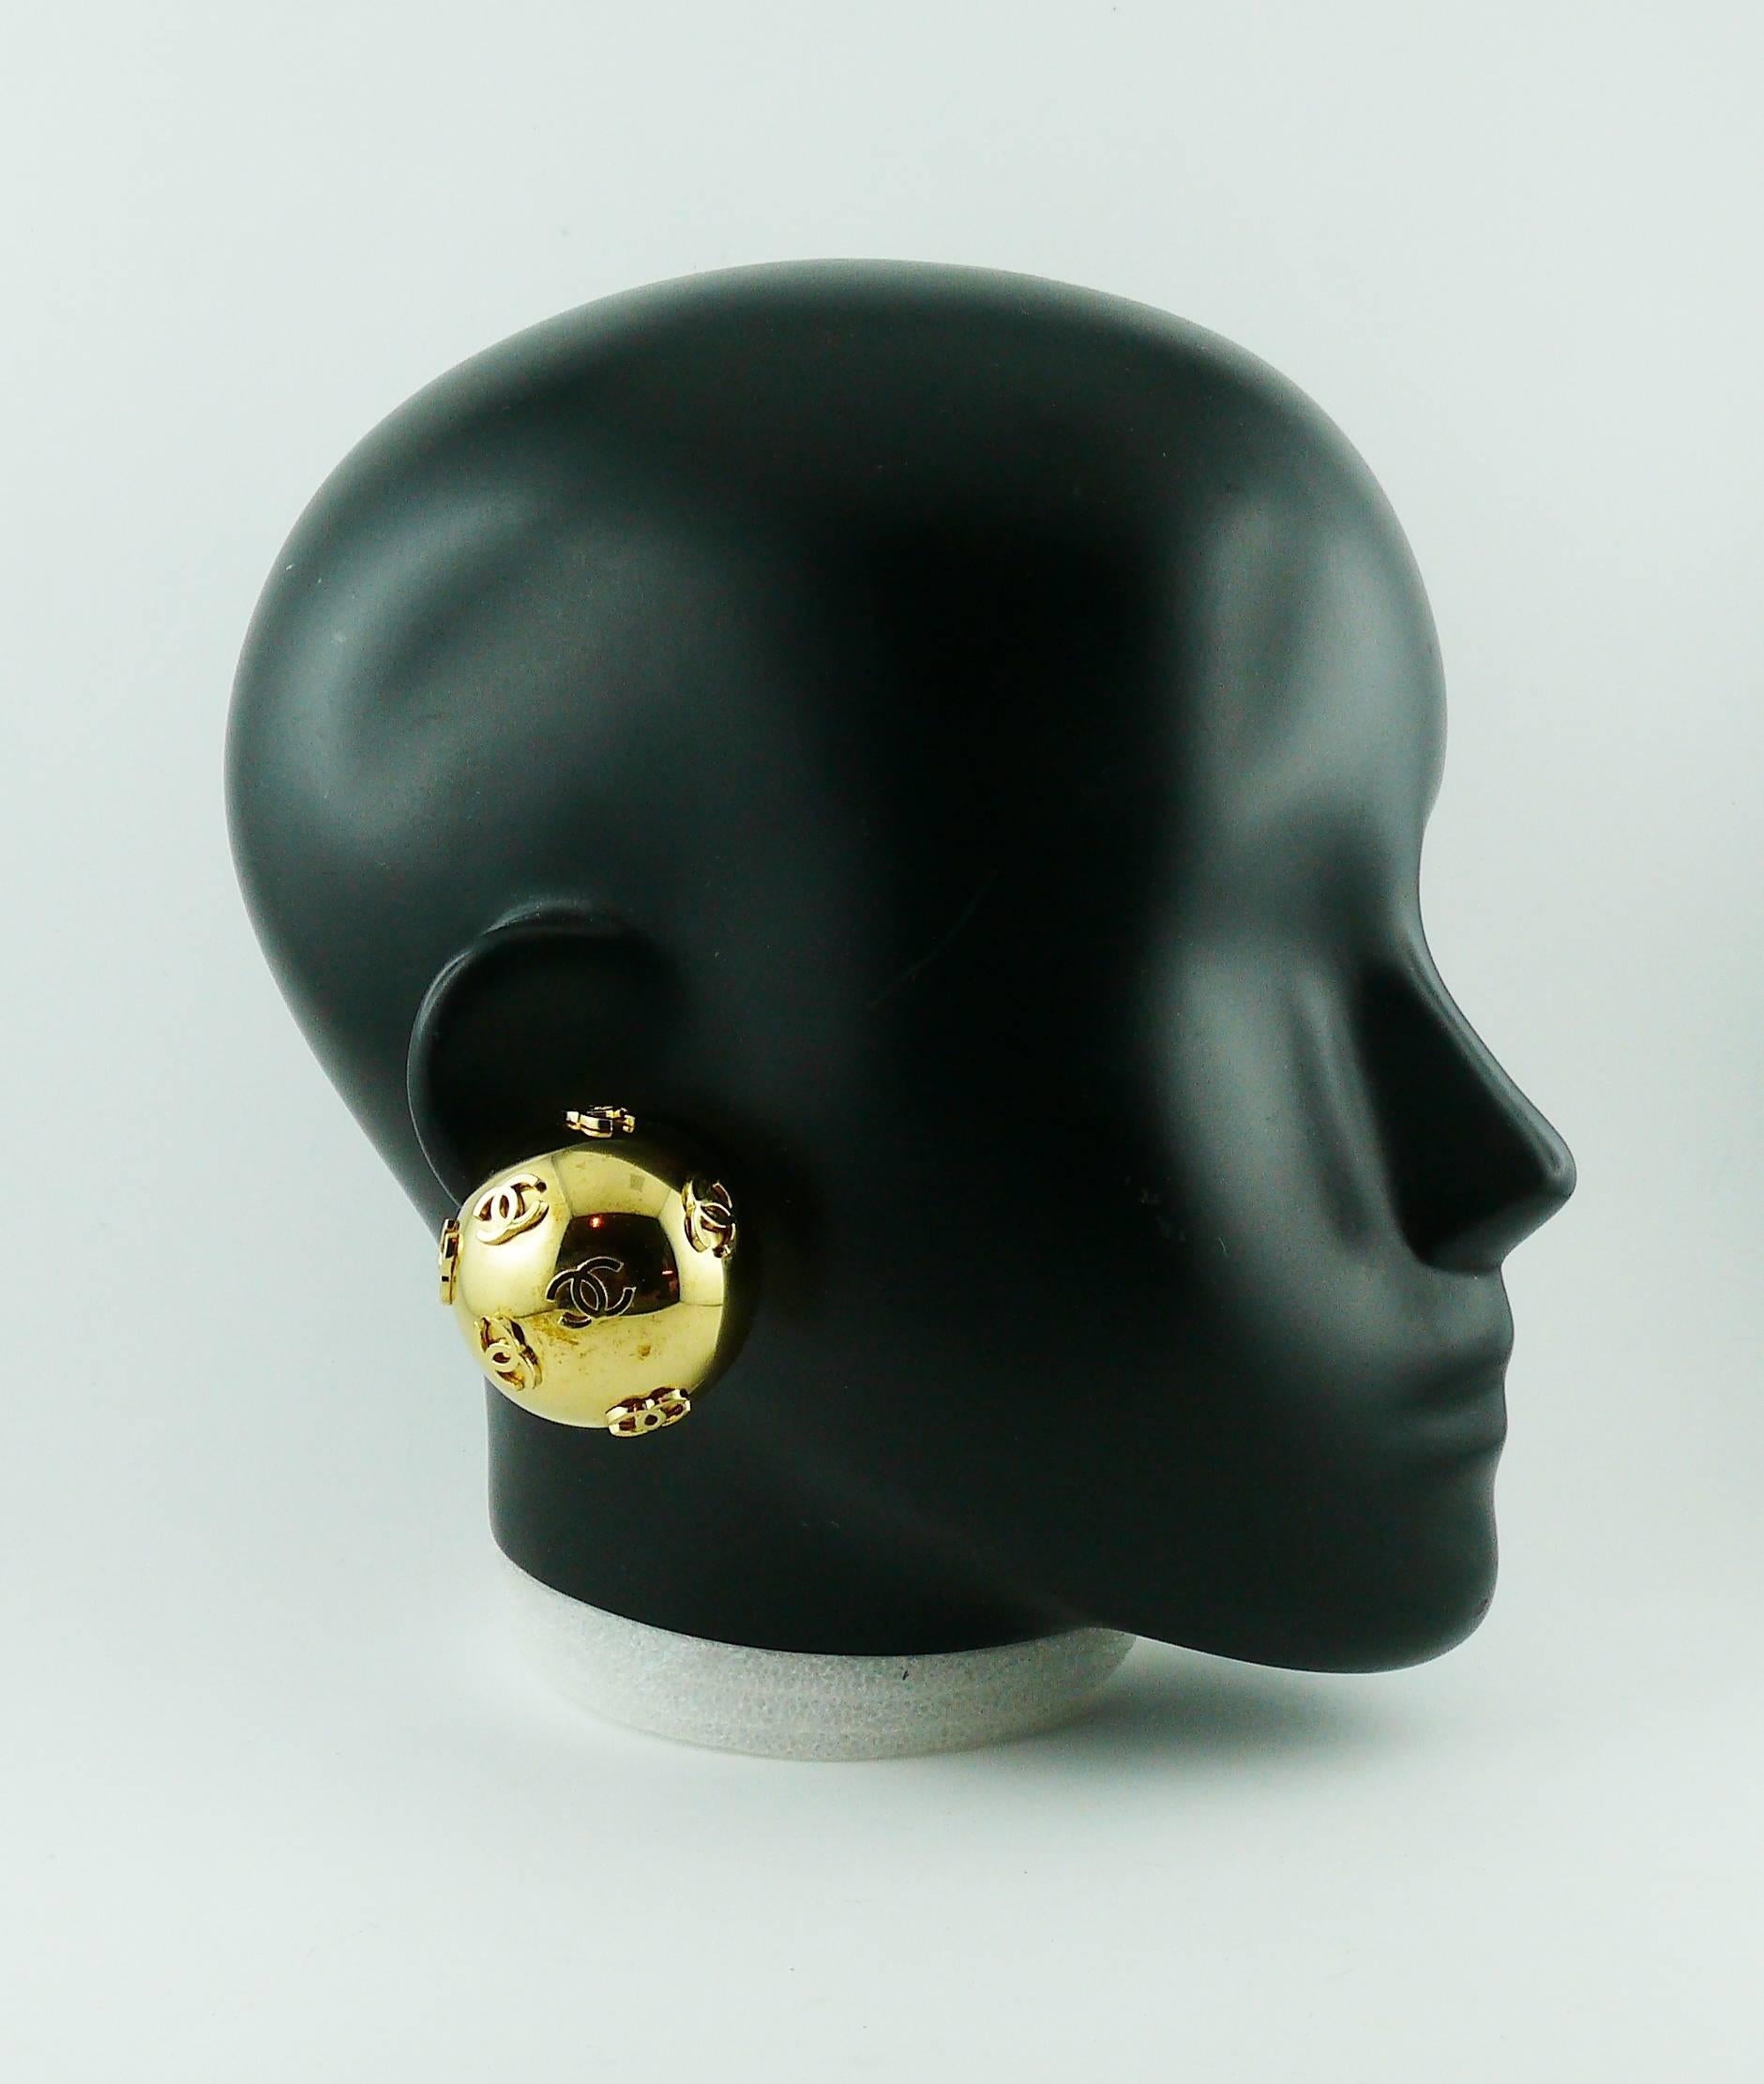 CHANEL vintage oversized gold tone dome clip-on earrings featuring CC logos all over.

Collection year : 1992.

Embossed CHANEL 2 7 Made in France.

Indicative measurements : diameter approx. 4 cm (1.57 inches).

JEWELRY CONDITION CHART
- New or